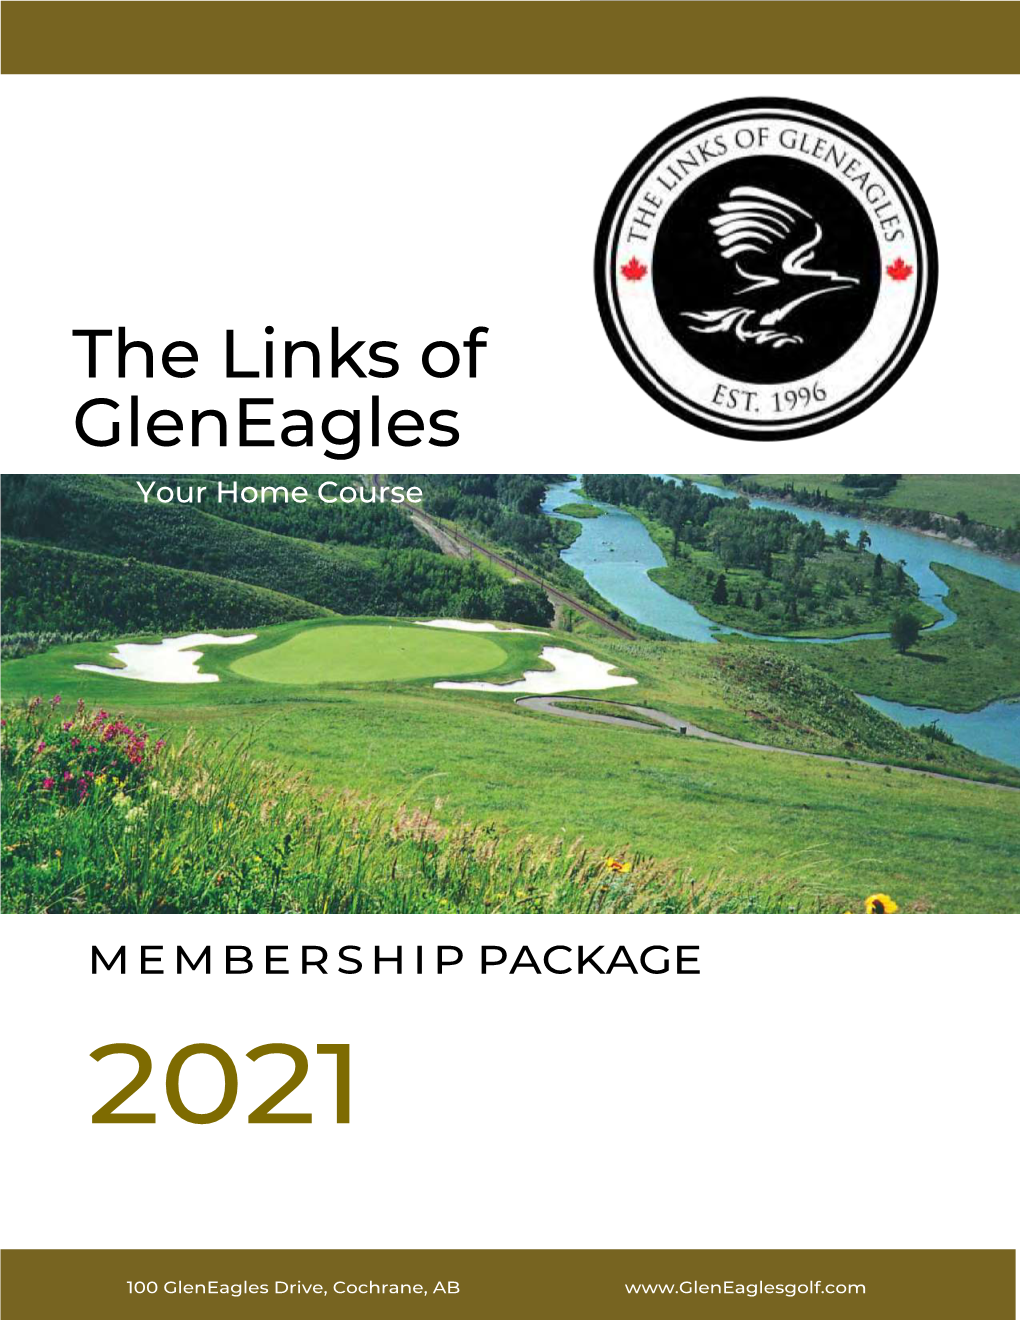 View the 2021 Package